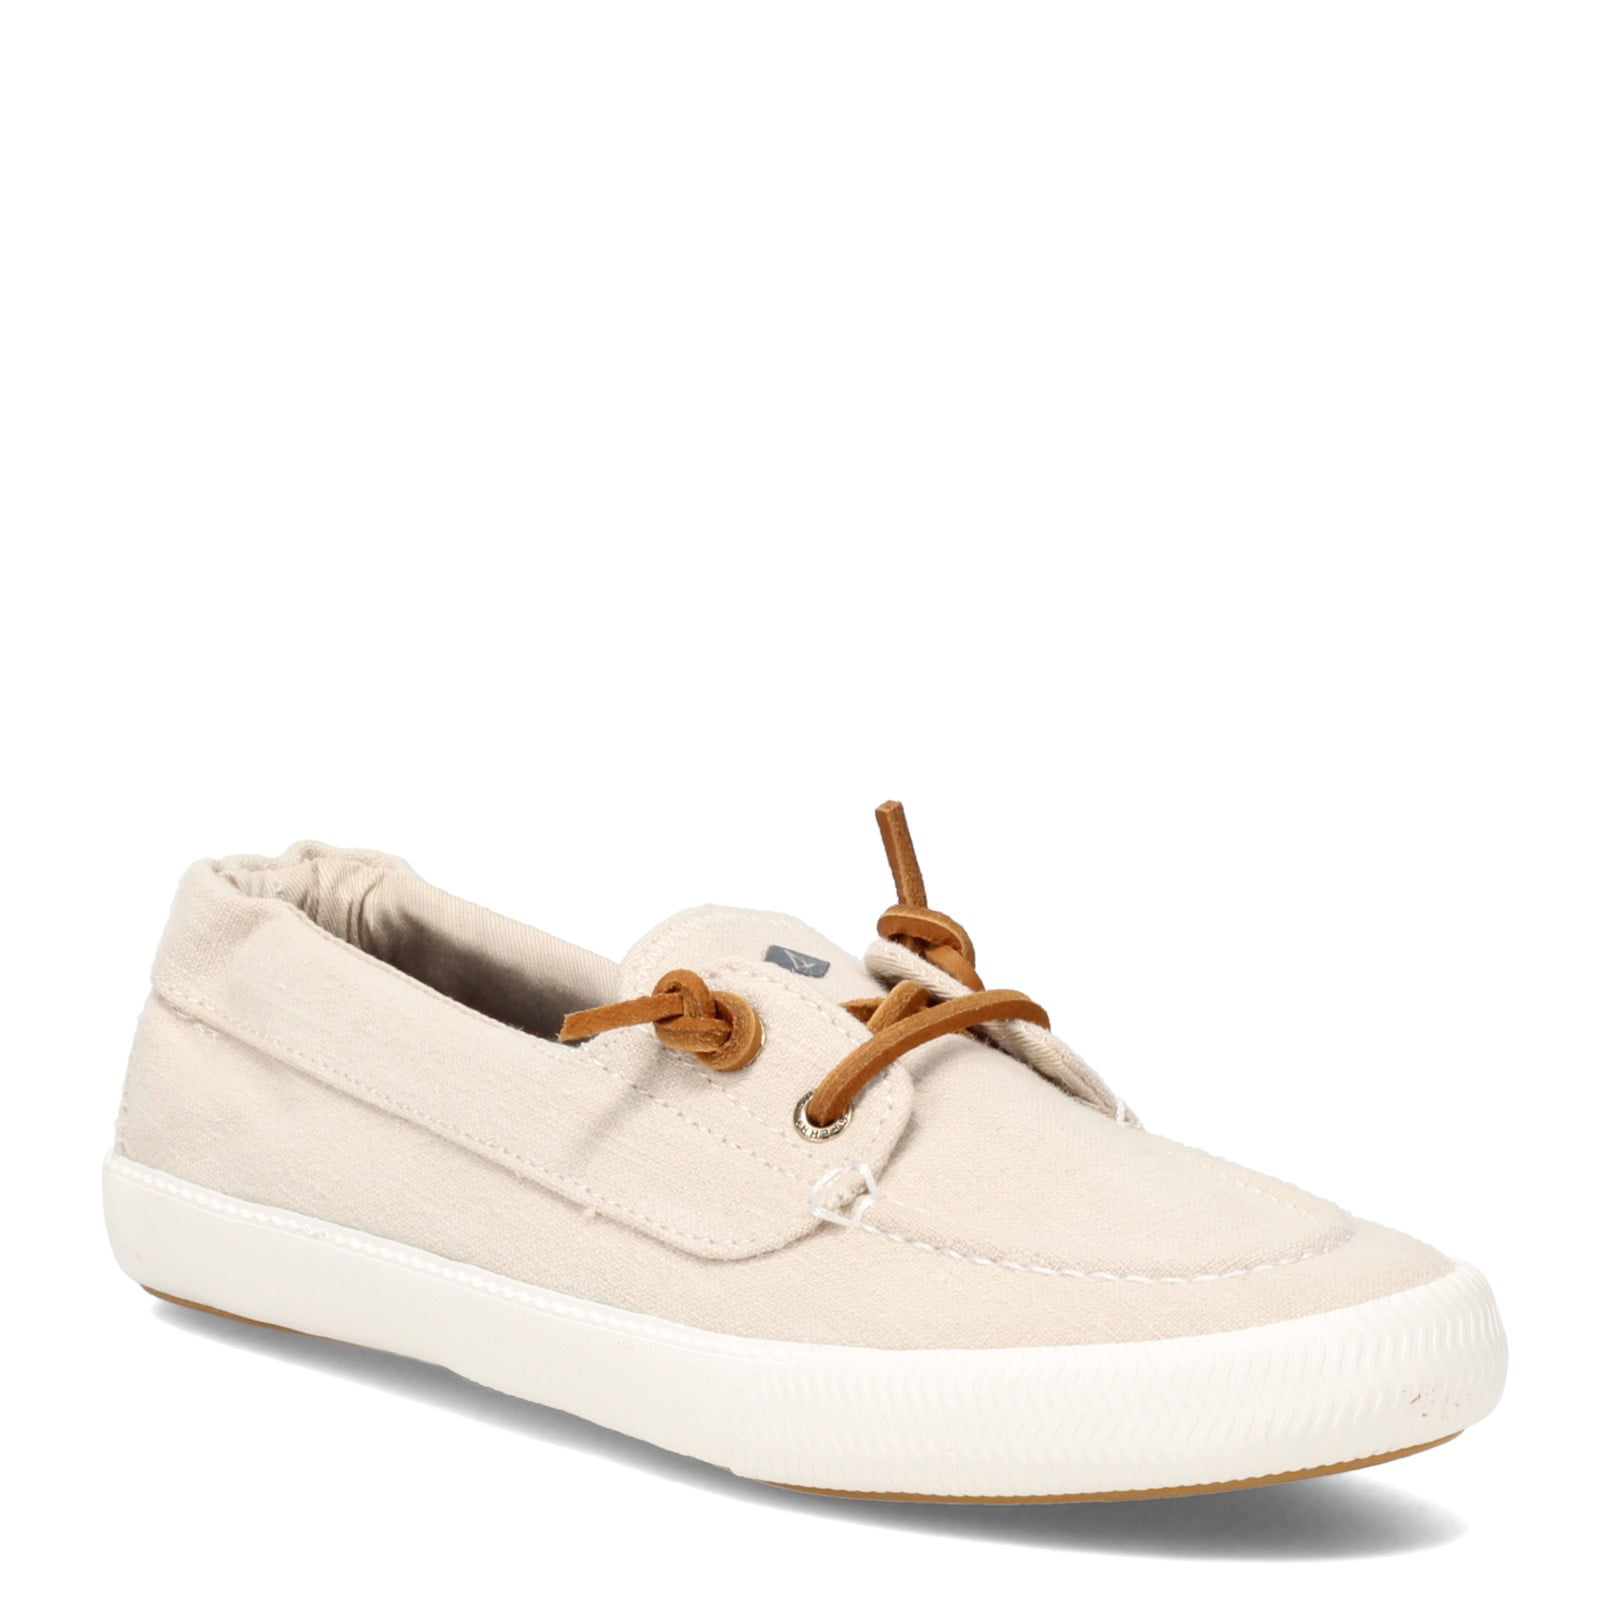 Womens Sperry Top-Sider Crest Boat Shoe White | lupon.gov.ph